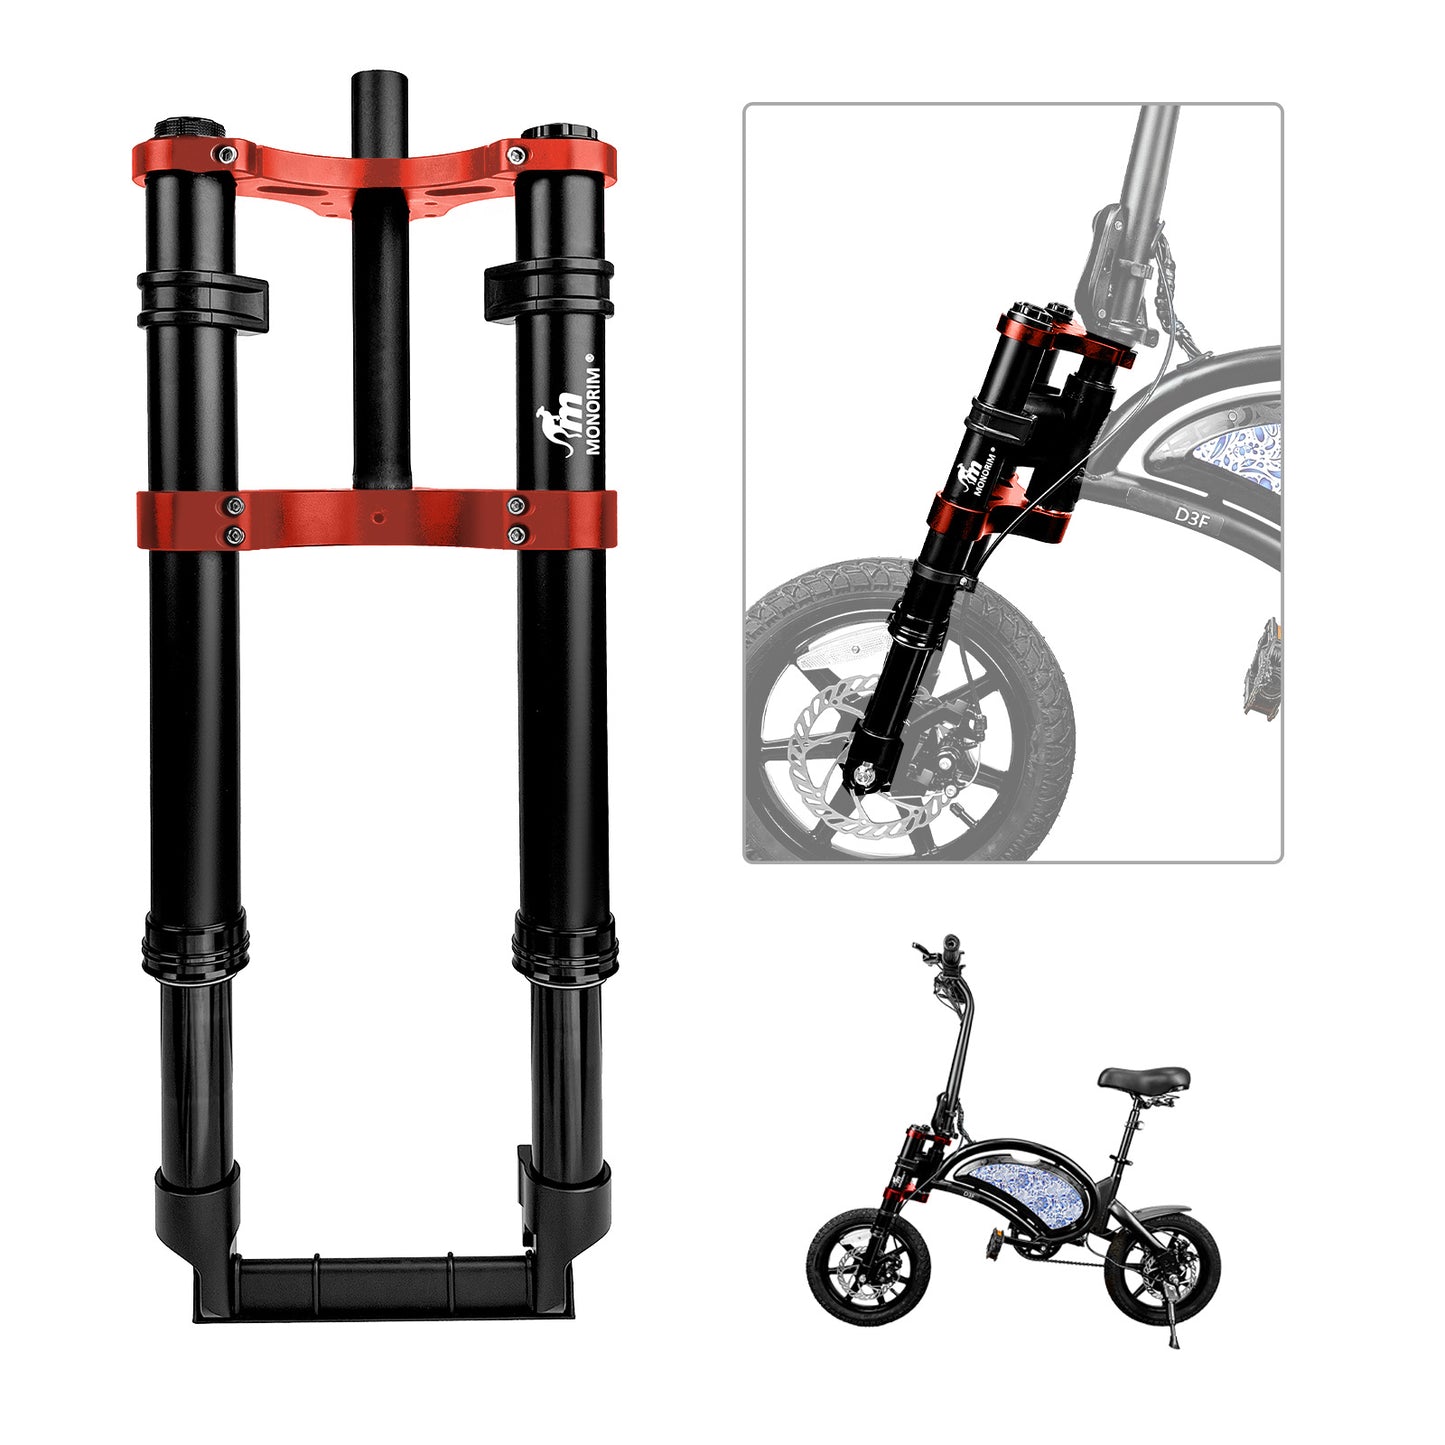 （Pre-order） Monorim MD0-14inch front suspension modify great kit to be more safety and comfort for DYU D3+/ D3F ebike ：